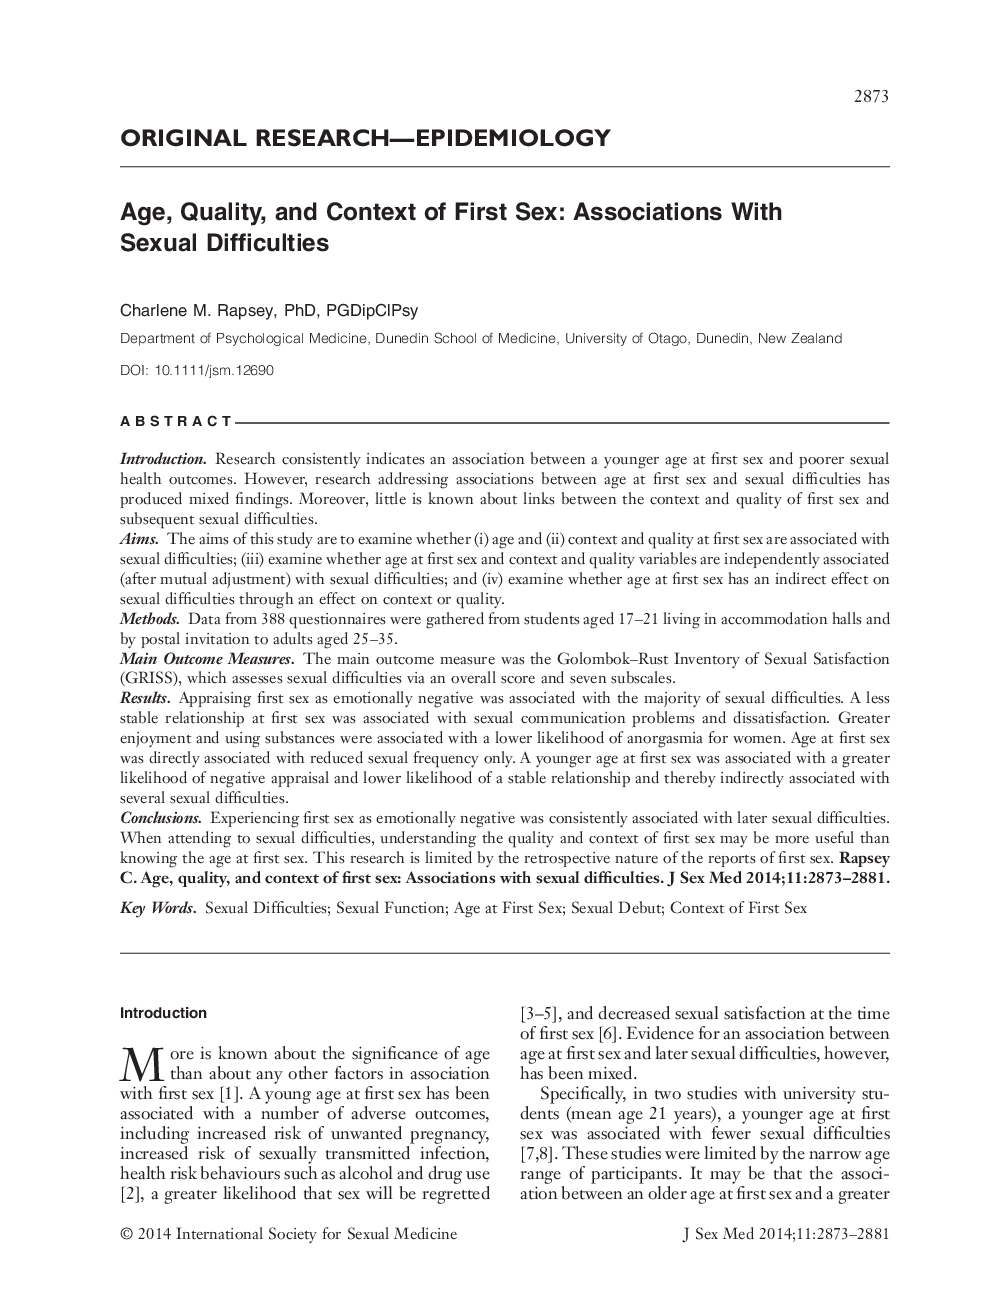 Age, Quality, and Context of First Sex: Associations With Sexual Difficulties 